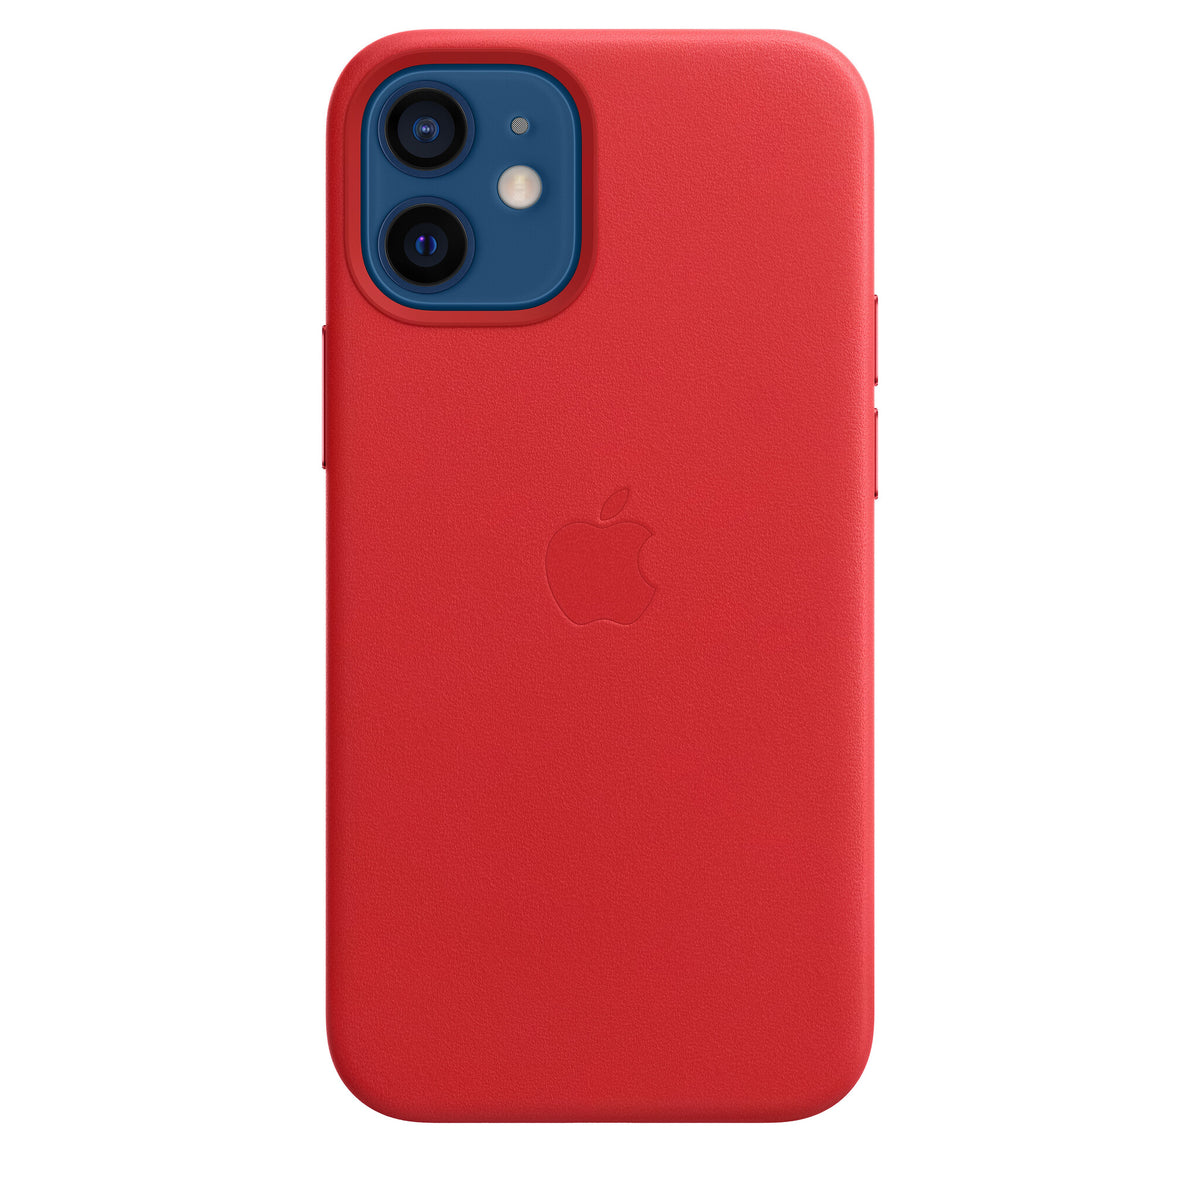 Apple MHK73ZM/A - Leather Case with MagSafe for iPhone 12 mini in (PRODUCT)RED